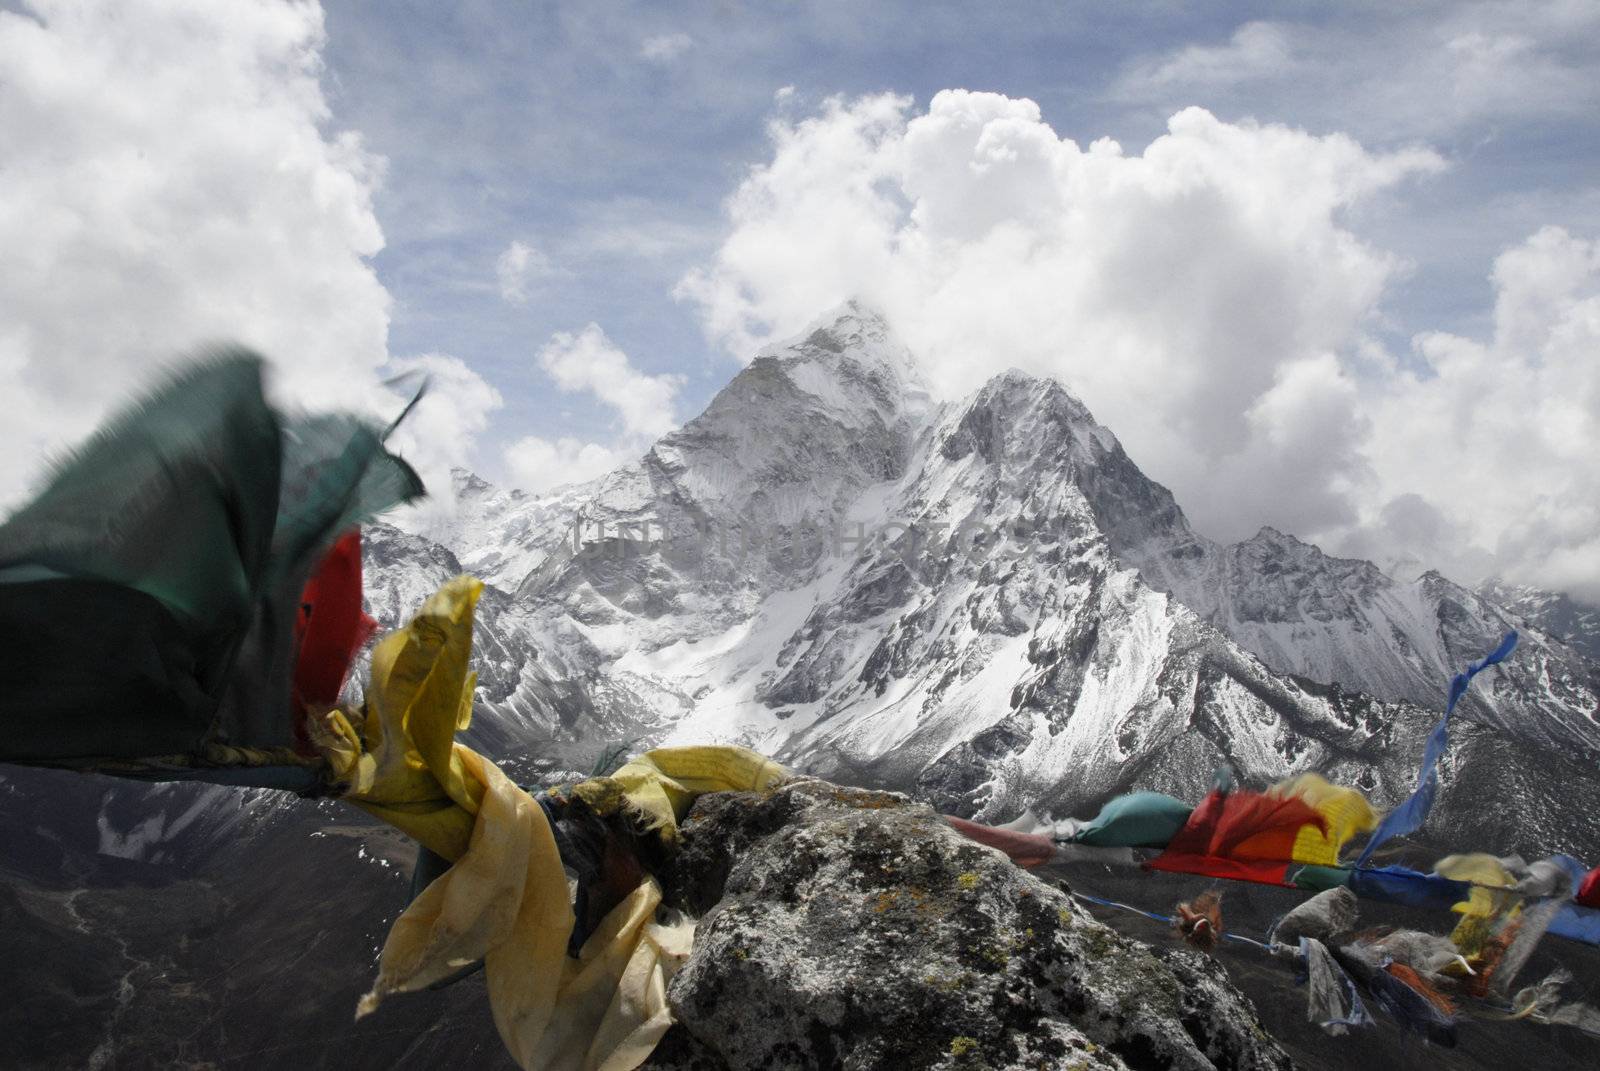 The North face of _Ama Dablam_  (6812 m) in the Himalayan Mountain Range as seen from the peak of _Pokalde Ri_  (5330 m) on the trek from Lukla to Mt. Everest Base Camp. Tibetian Buddist prayer flags flap in the wind in the foreground